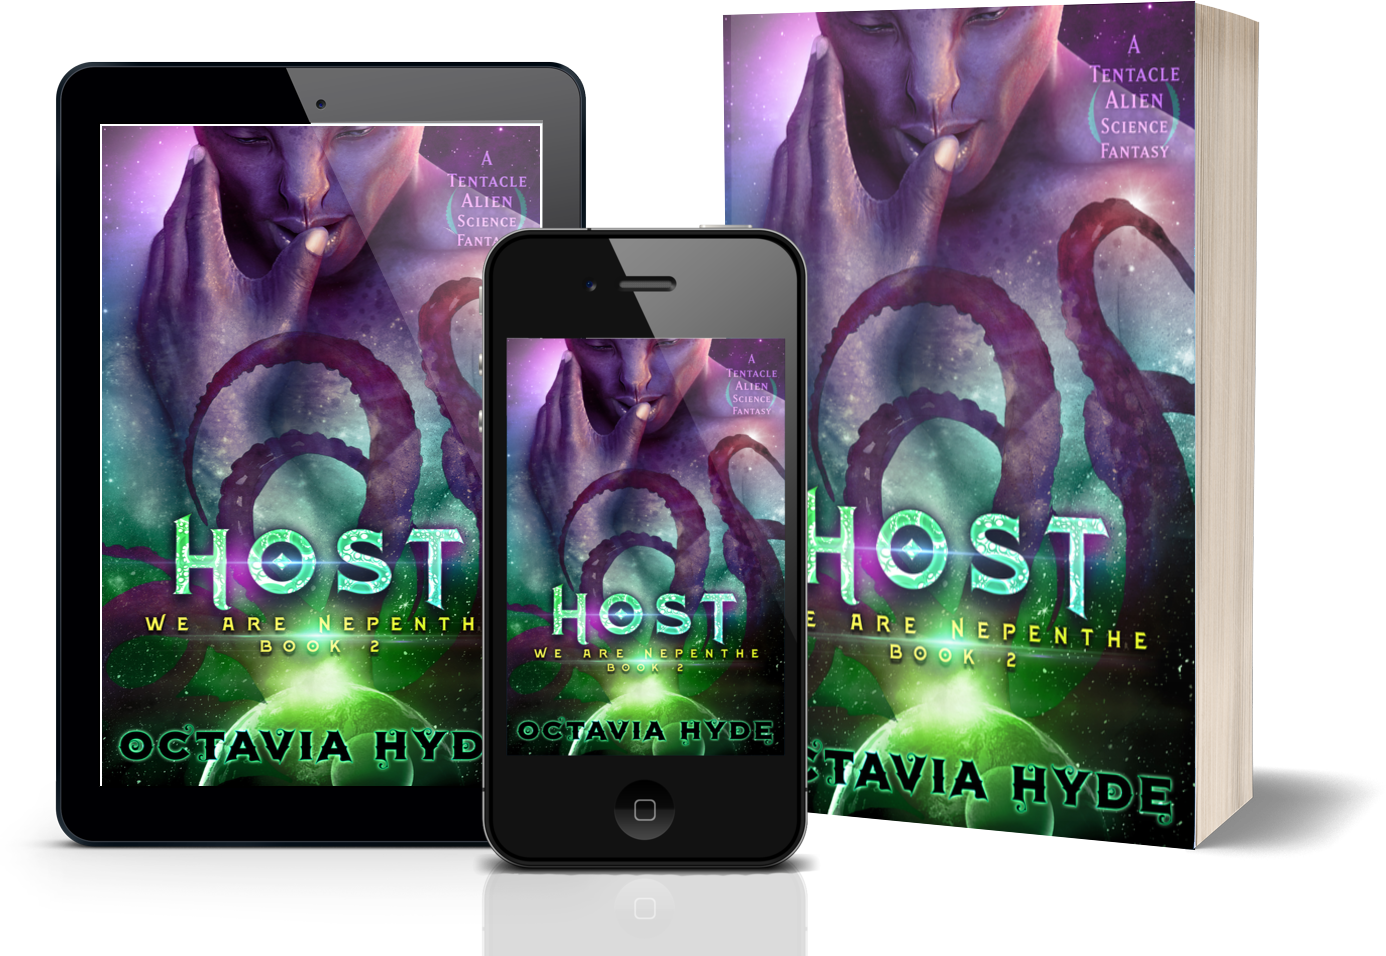 Host by Octavia Hyde, displayed in e-reader, phone, and paperback formats